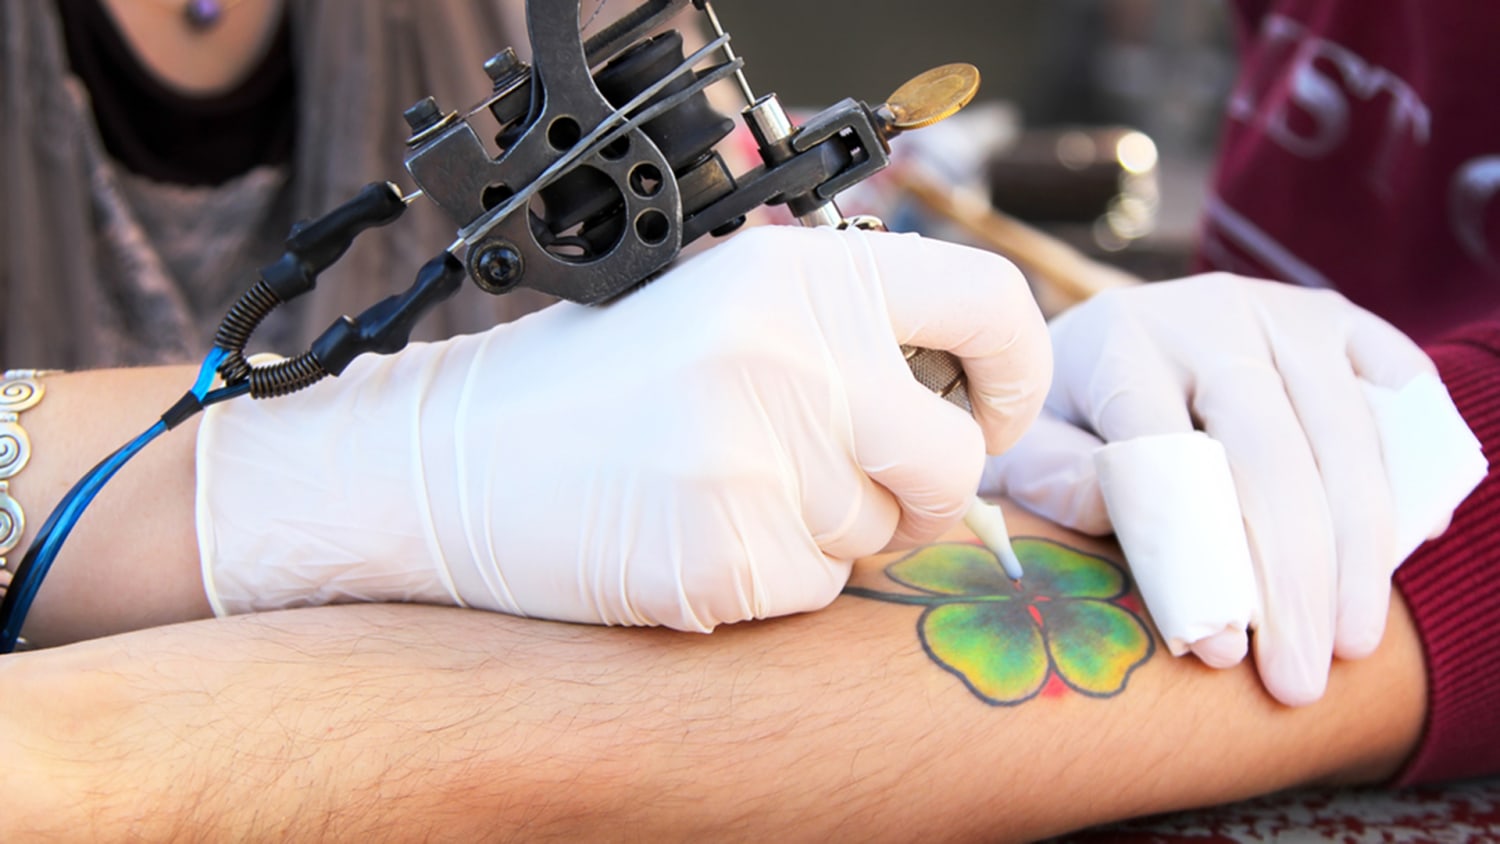 What To Do If Your Healed Tattoo Is Bumpy Or Itchy 